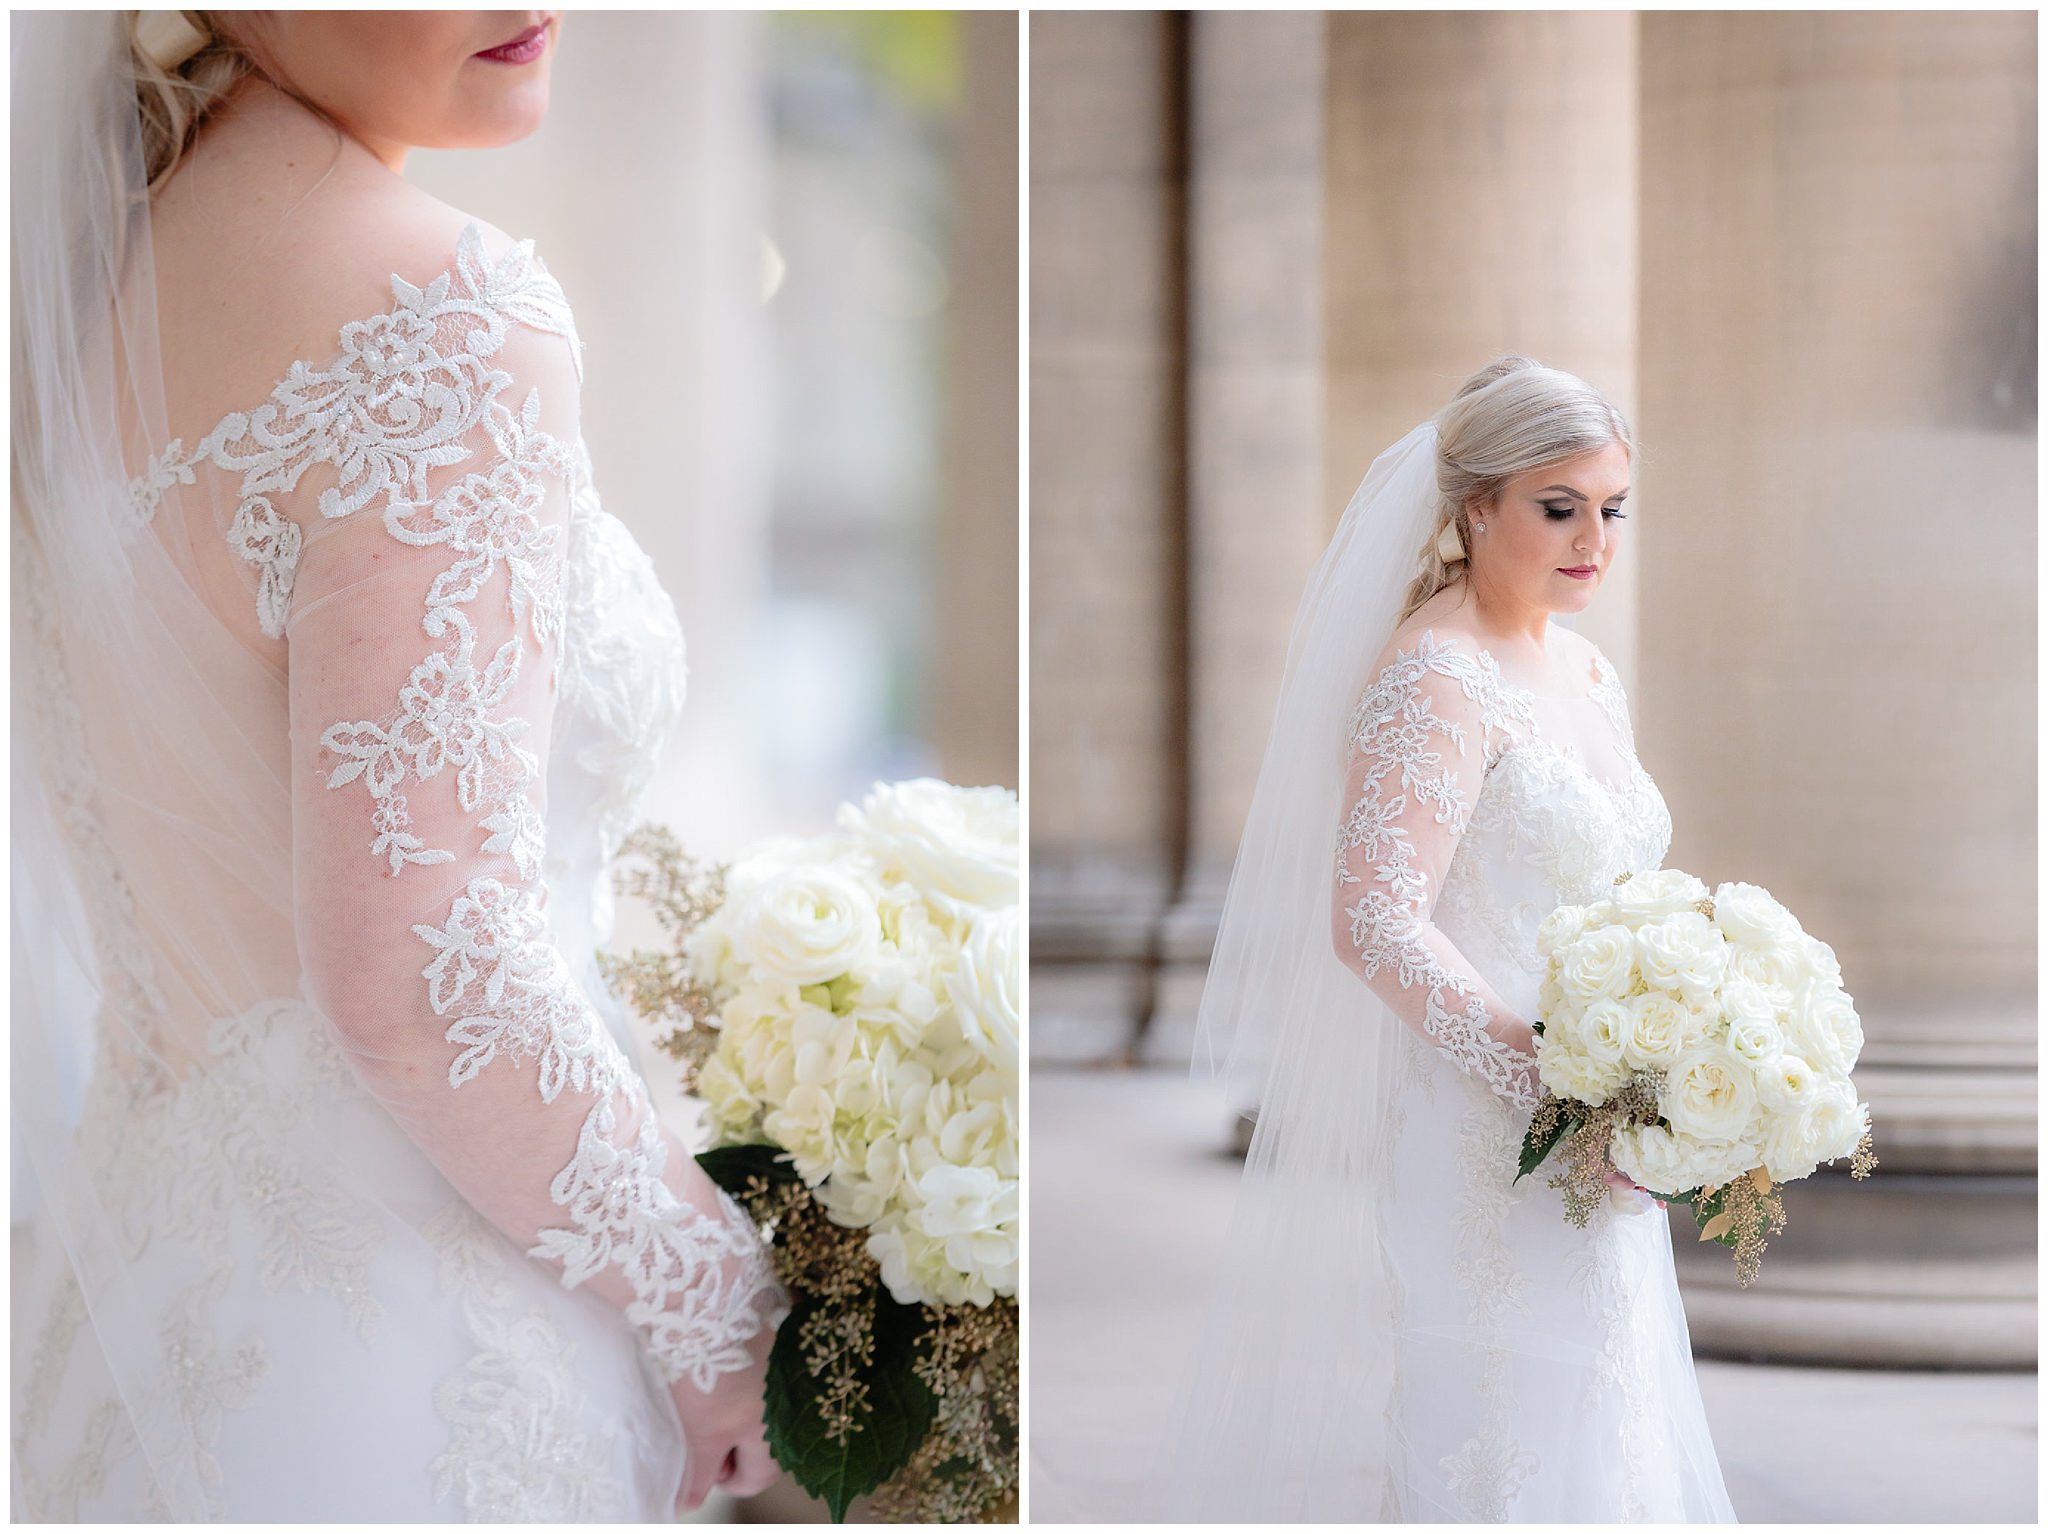 Bride poses for portraits in a Sottero & Midgley dress from Sorelle Briadl & white bouquet by Hearts & Flowers